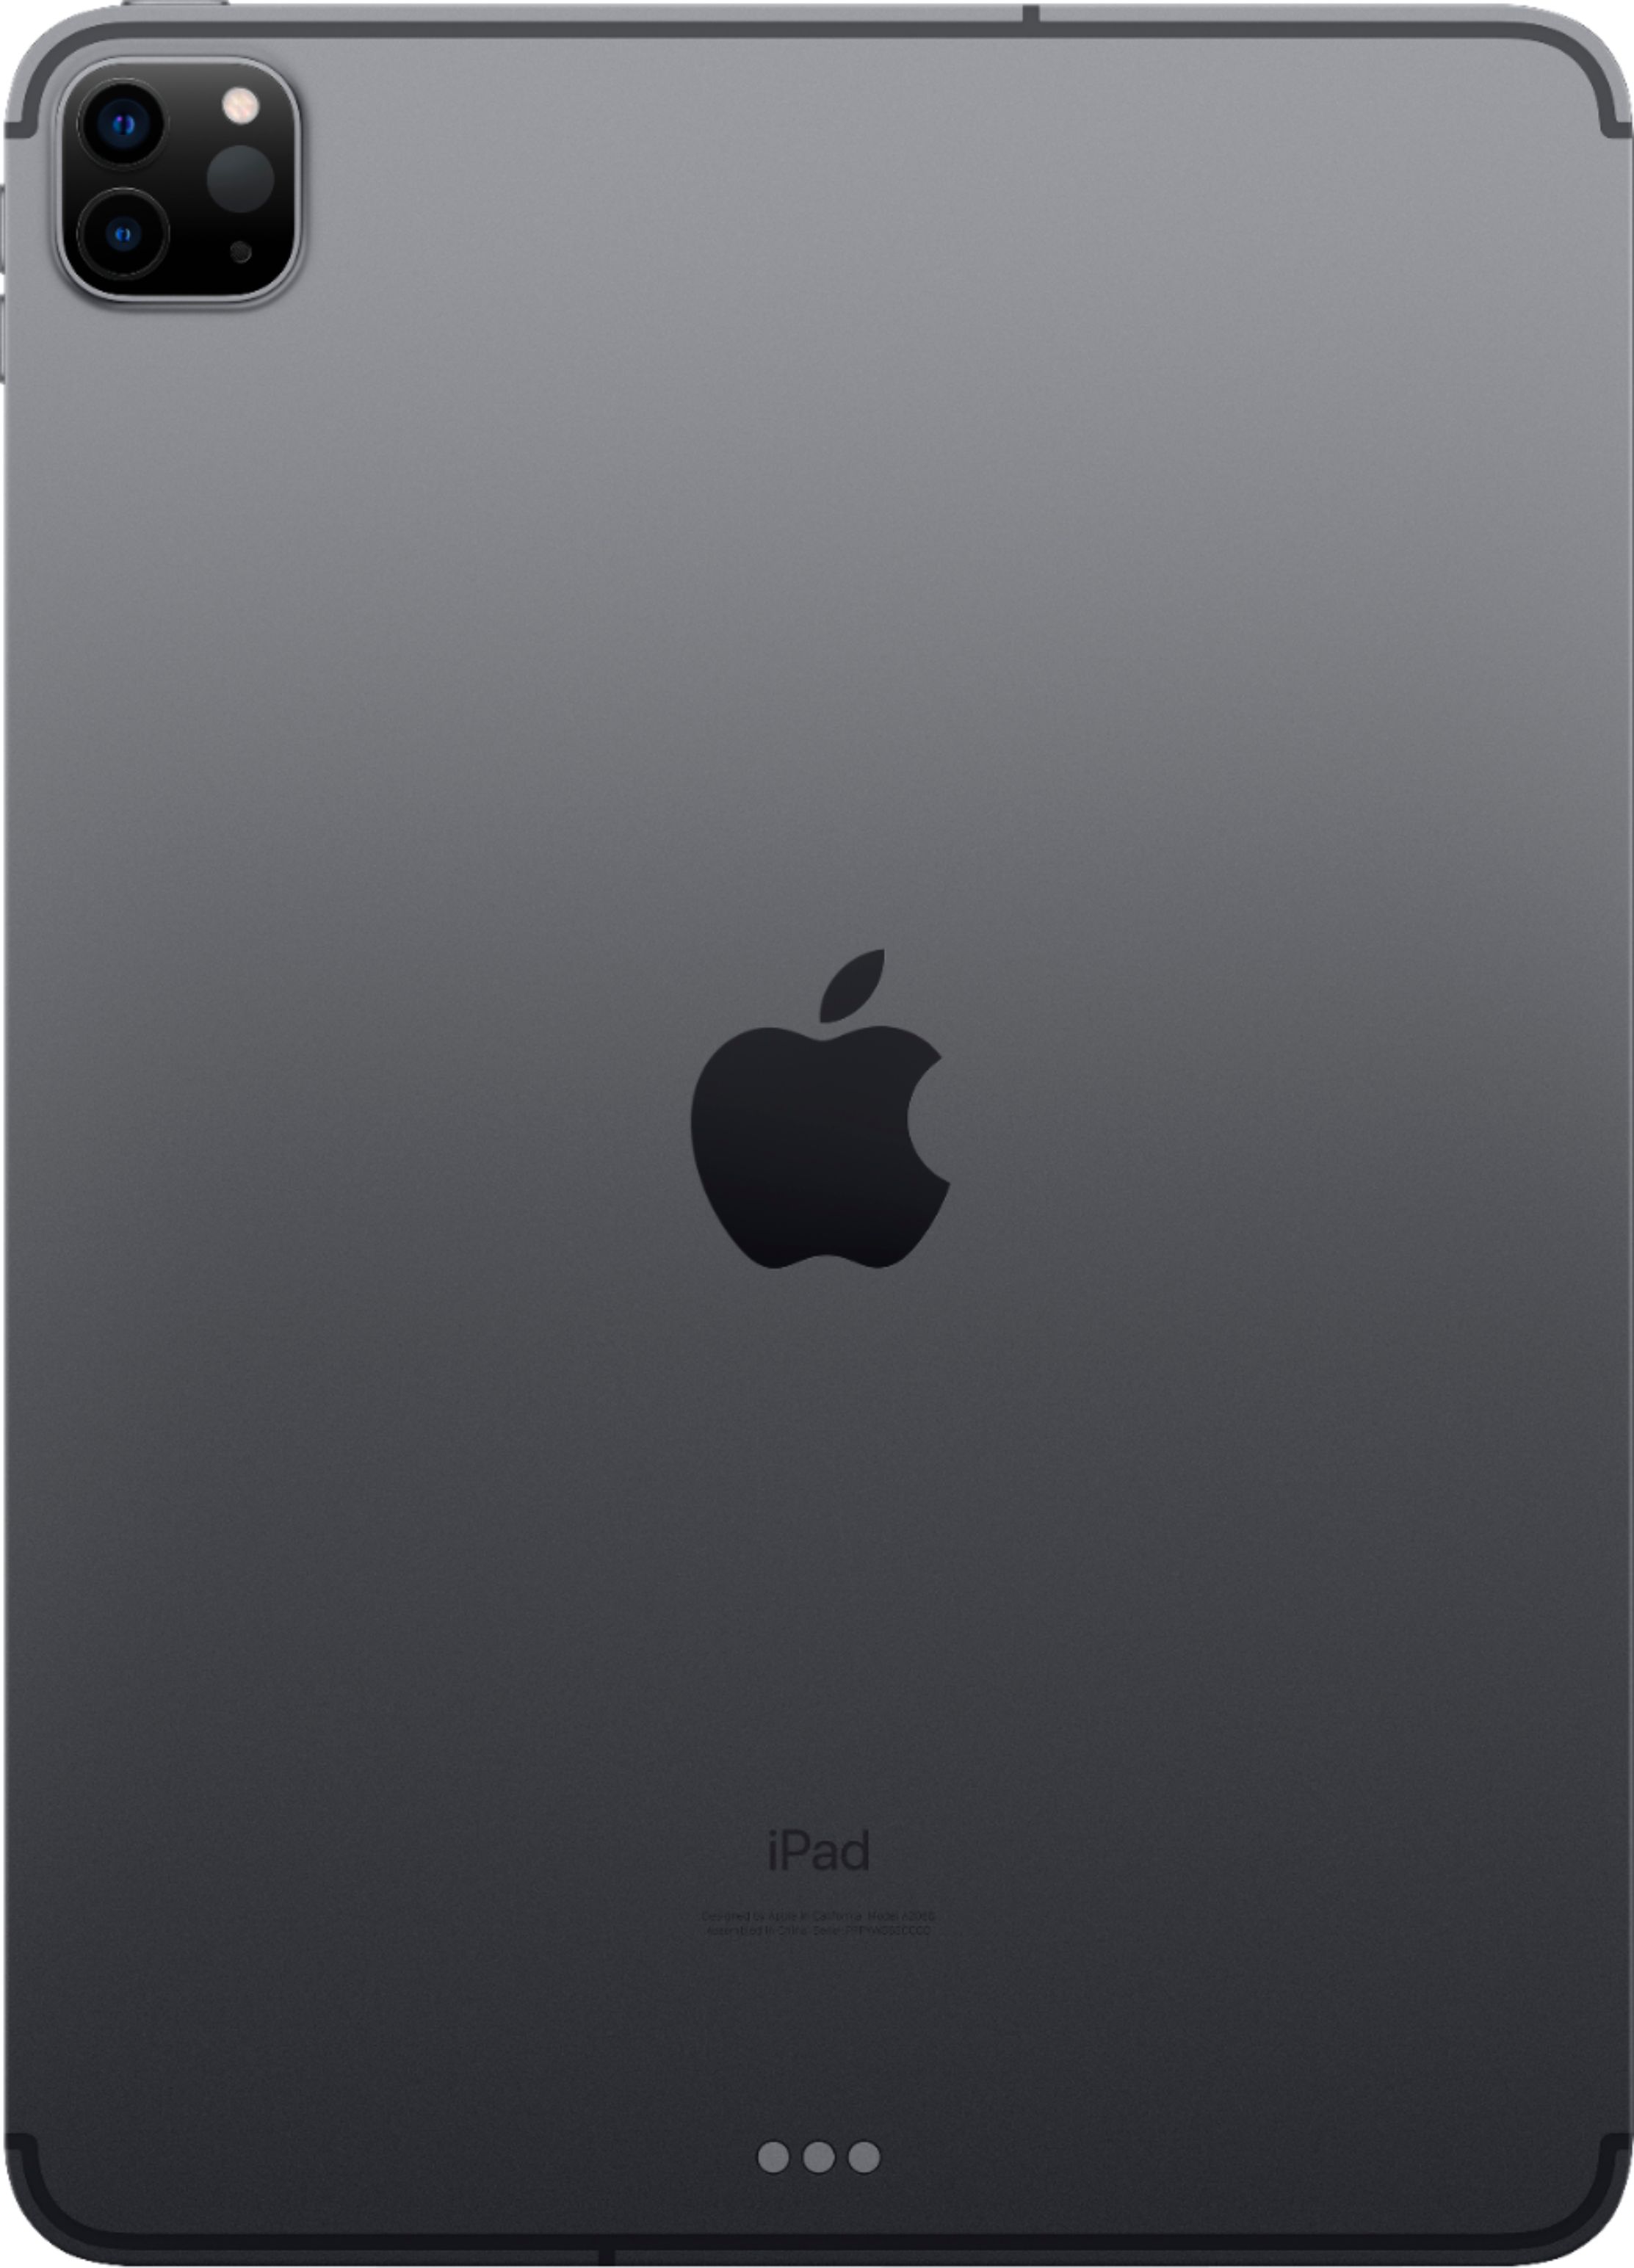 Apple 11-Inch iPad Pro (2nd Generation) with Wi-Fi 512GB Space 